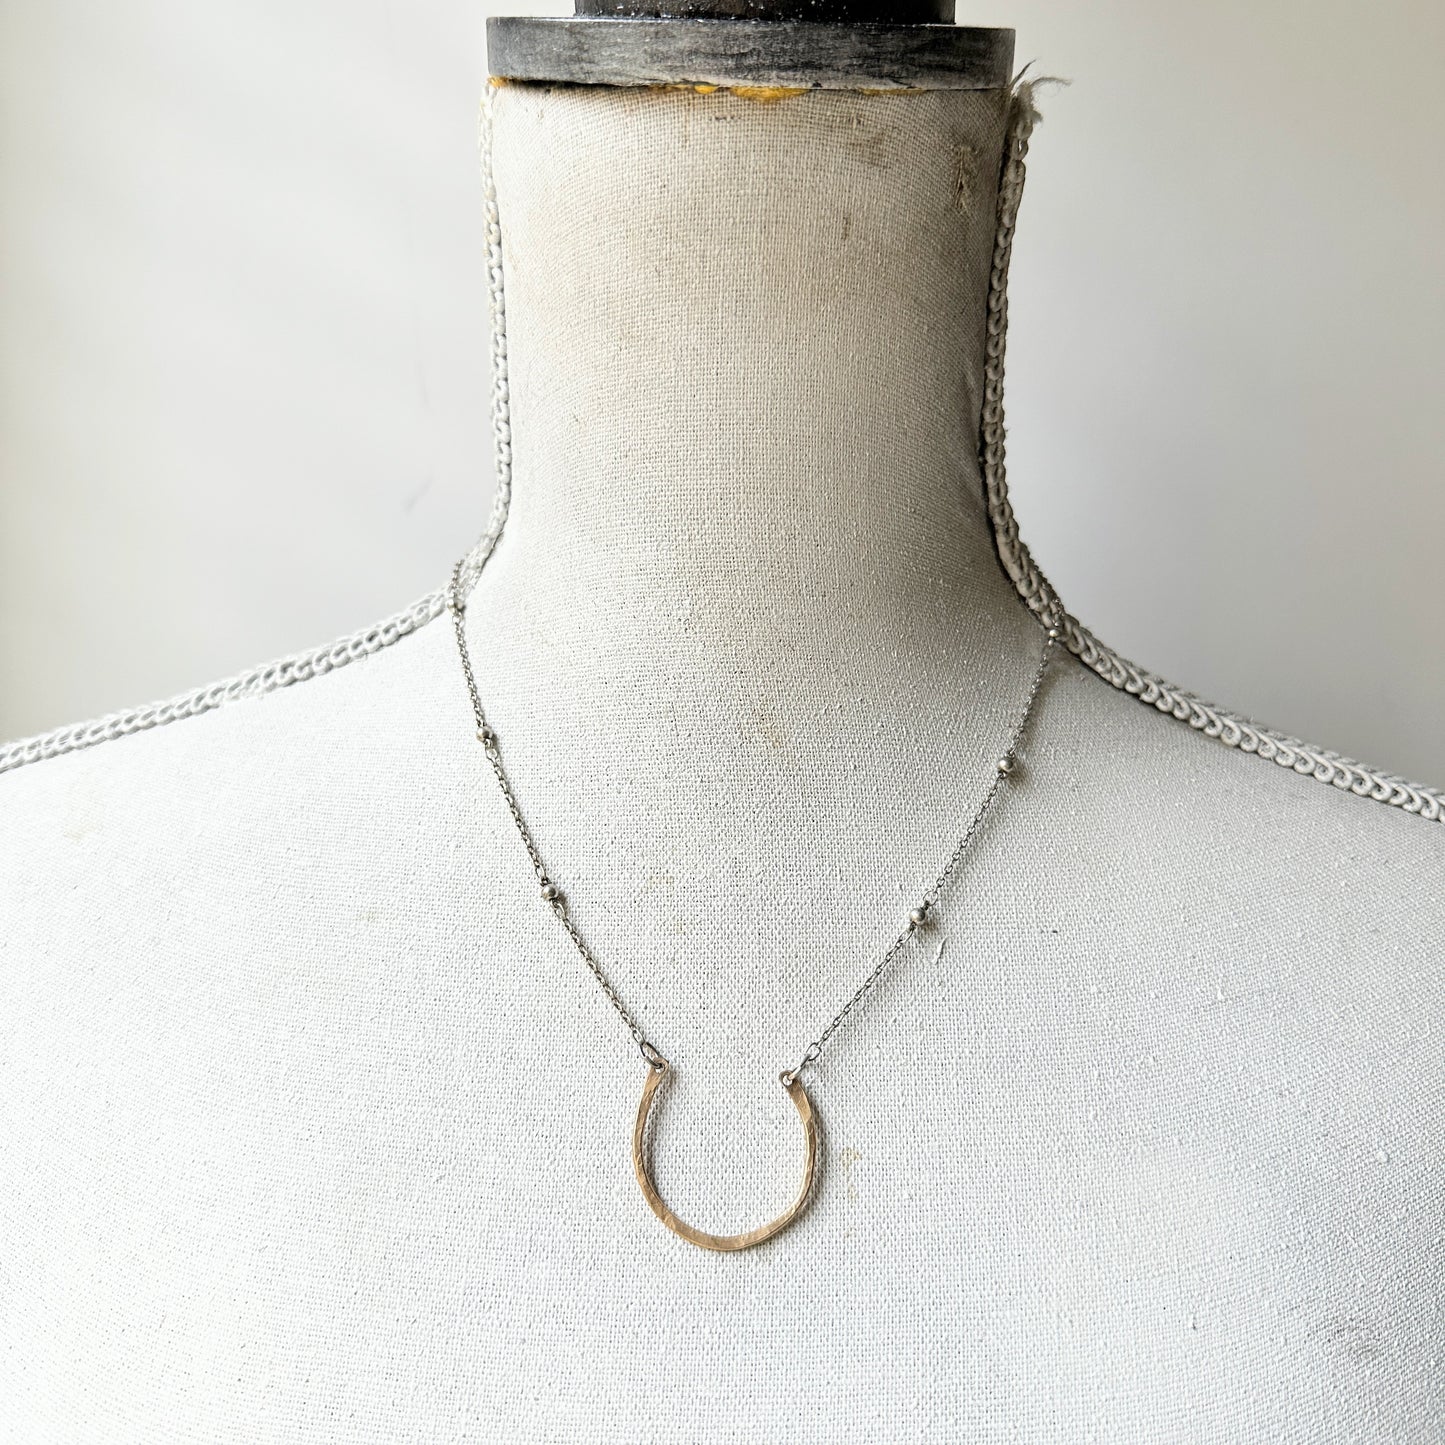 Small gold filled horseshoe necklace